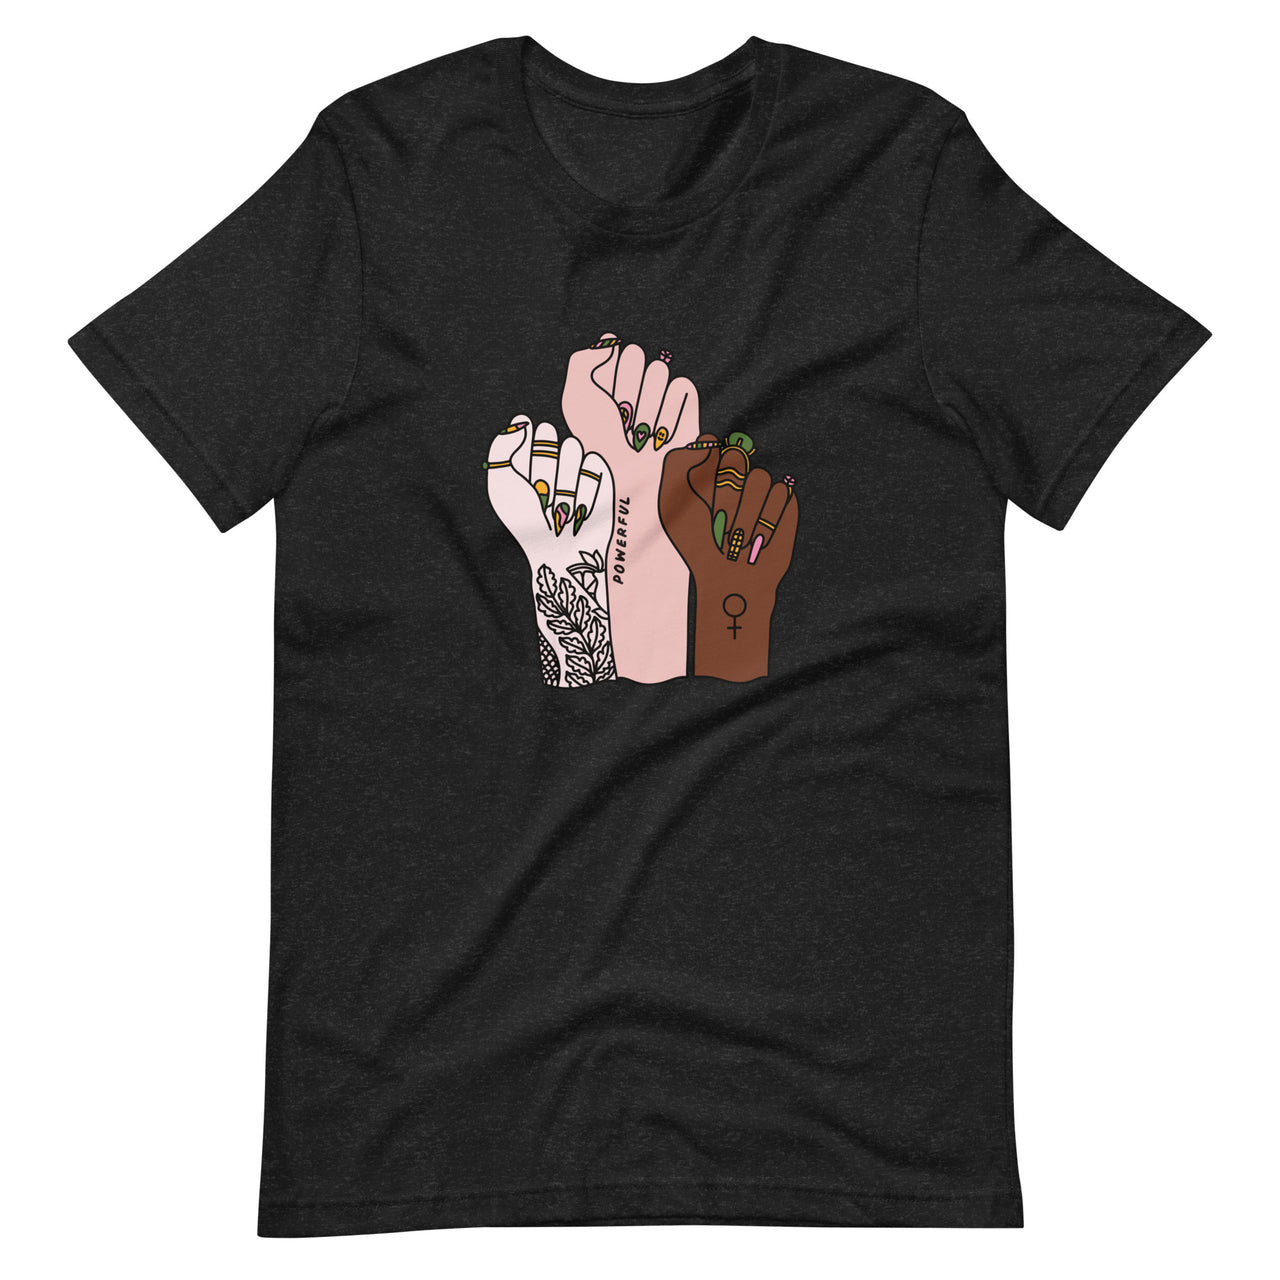 We Rise Together Tee: Bella + Canvas